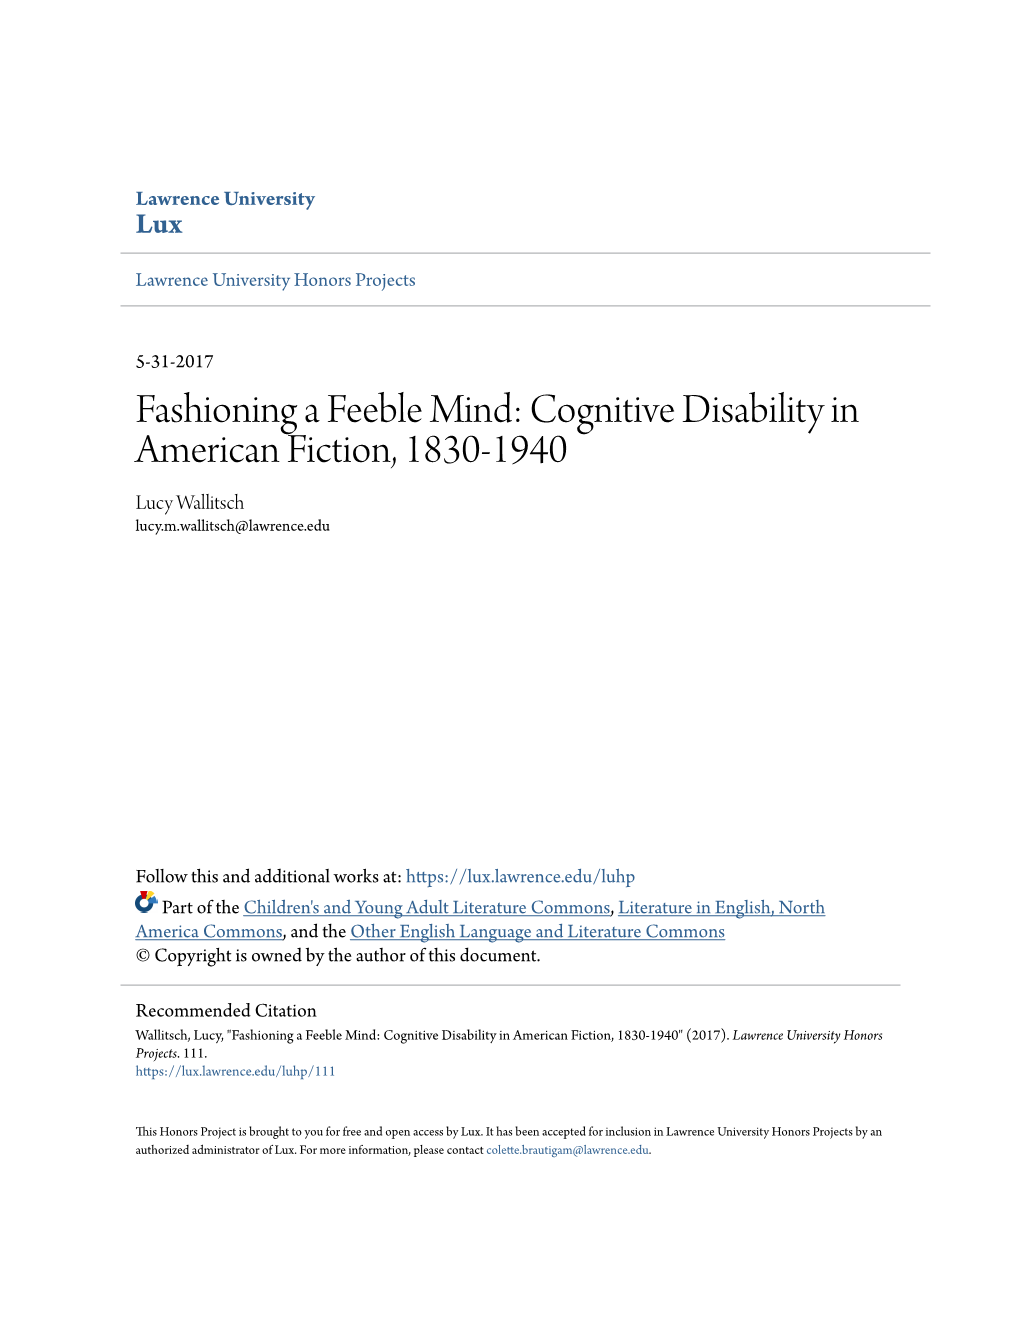 Fashioning a Feeble Mind: Cognitive Disability in American Fiction, 1830-1940 Lucy Wallitsch Lucy.M.Wallitsch@Lawrence.Edu